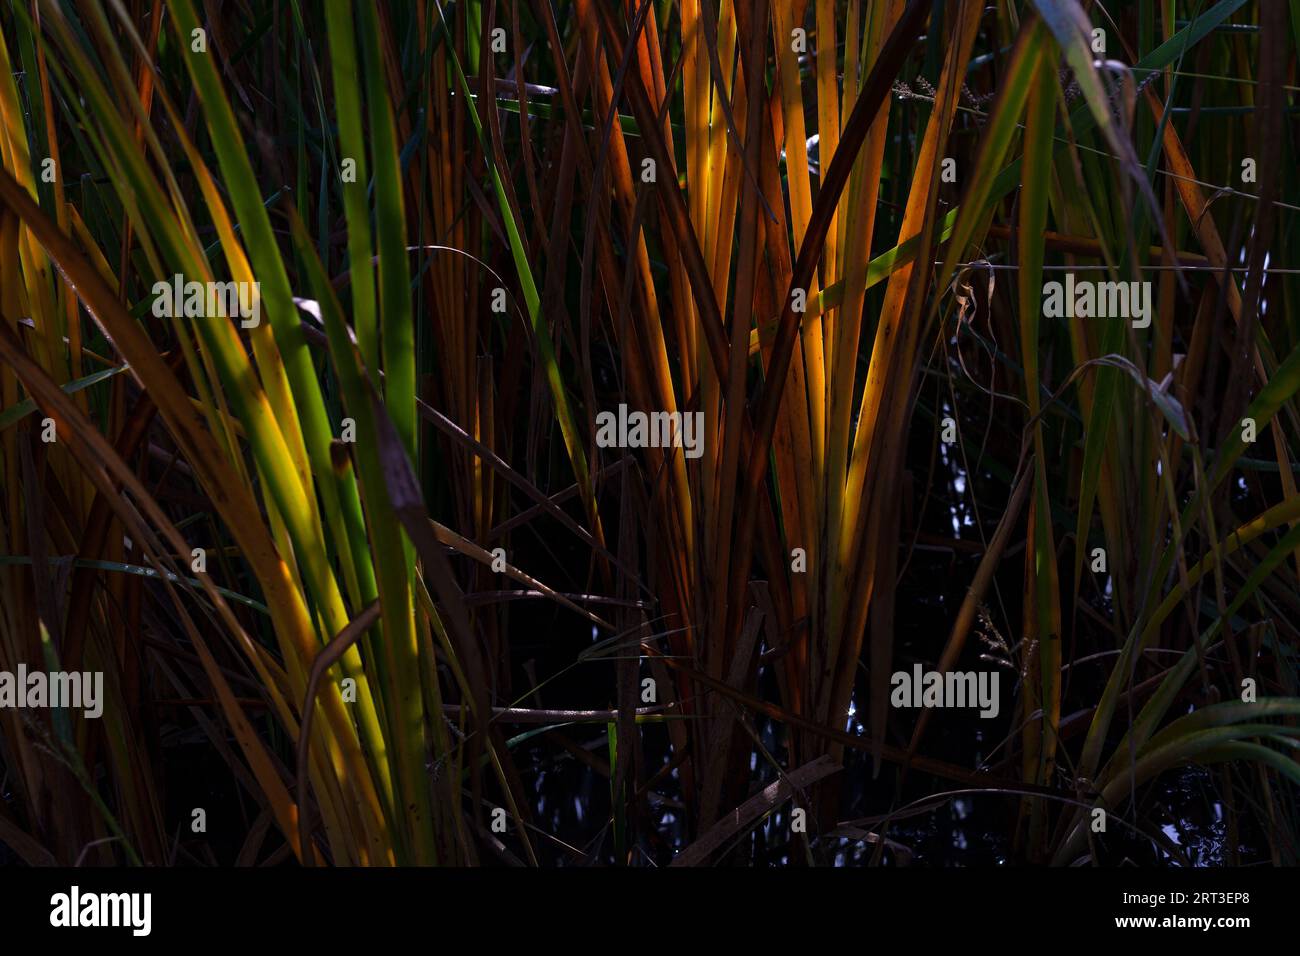 Reeds in the pond. Cattails and tall grass growing in the wetlands Stock Photo